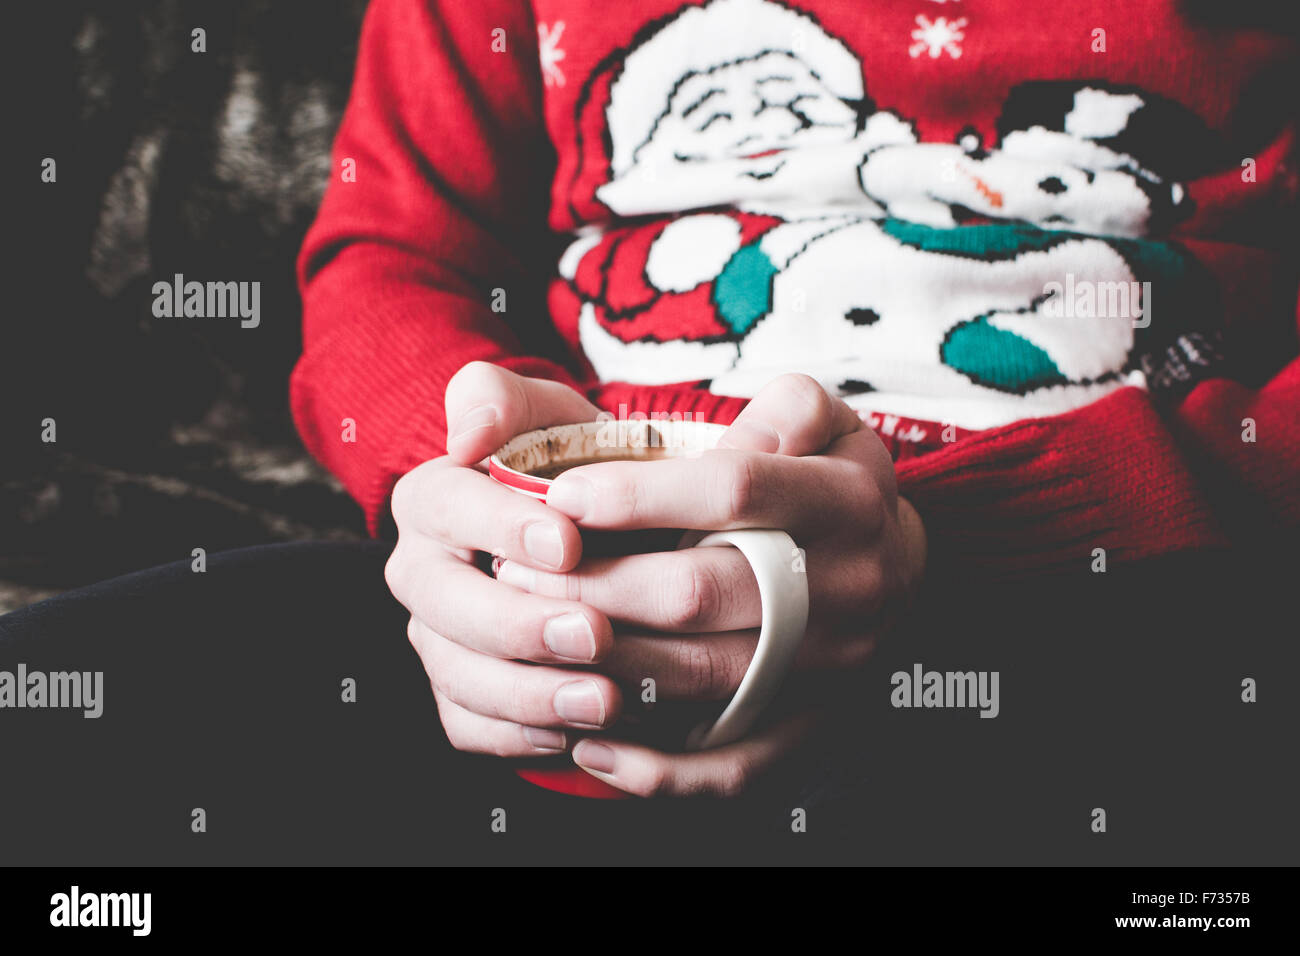 Man wearing a Christmas jumper and holding a hot chocolate Stock Photo